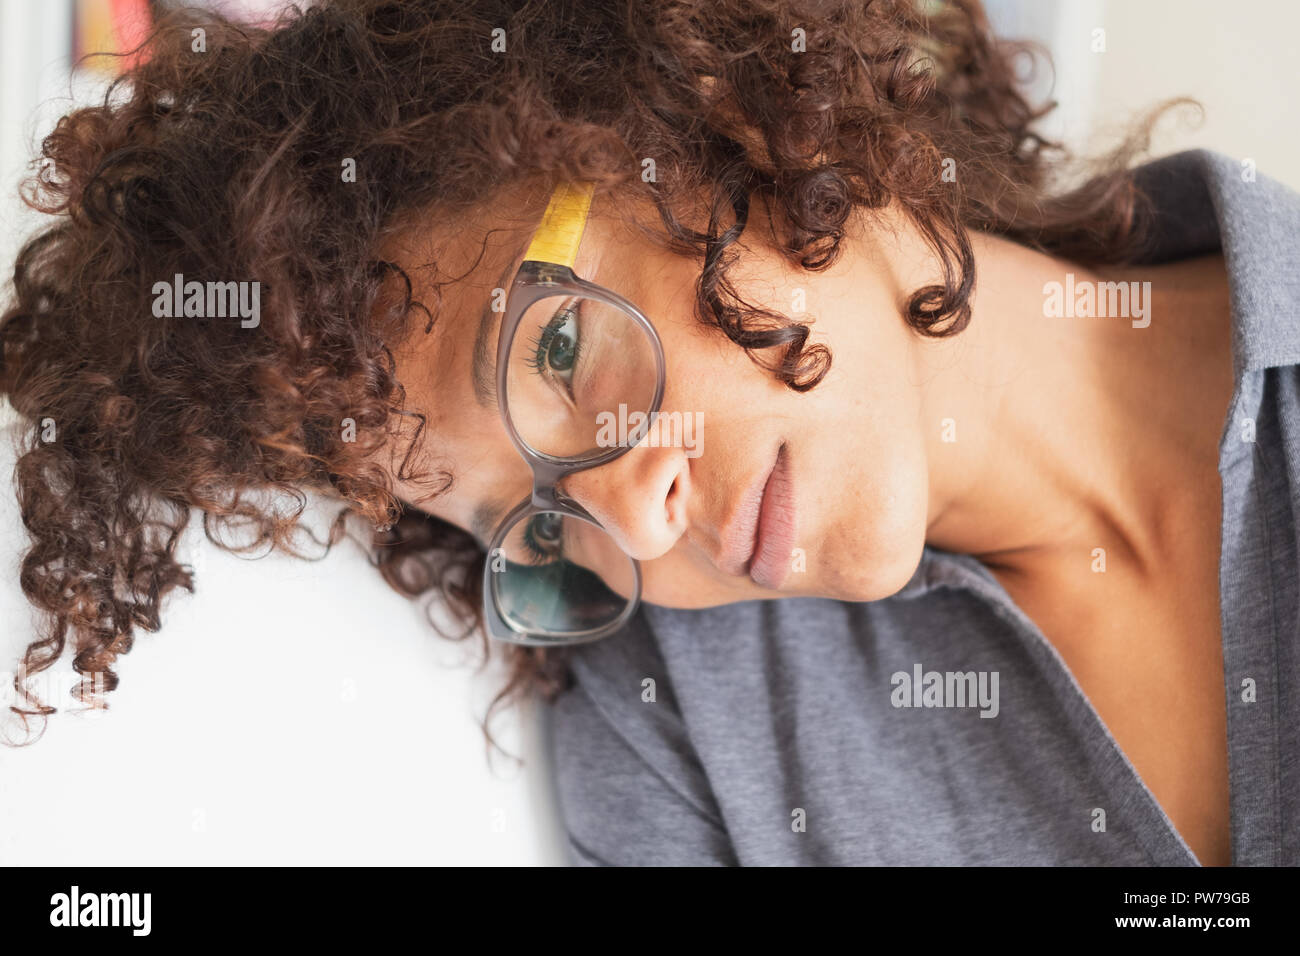 Brooding and thoughtful black woman face portrait Stock Photo